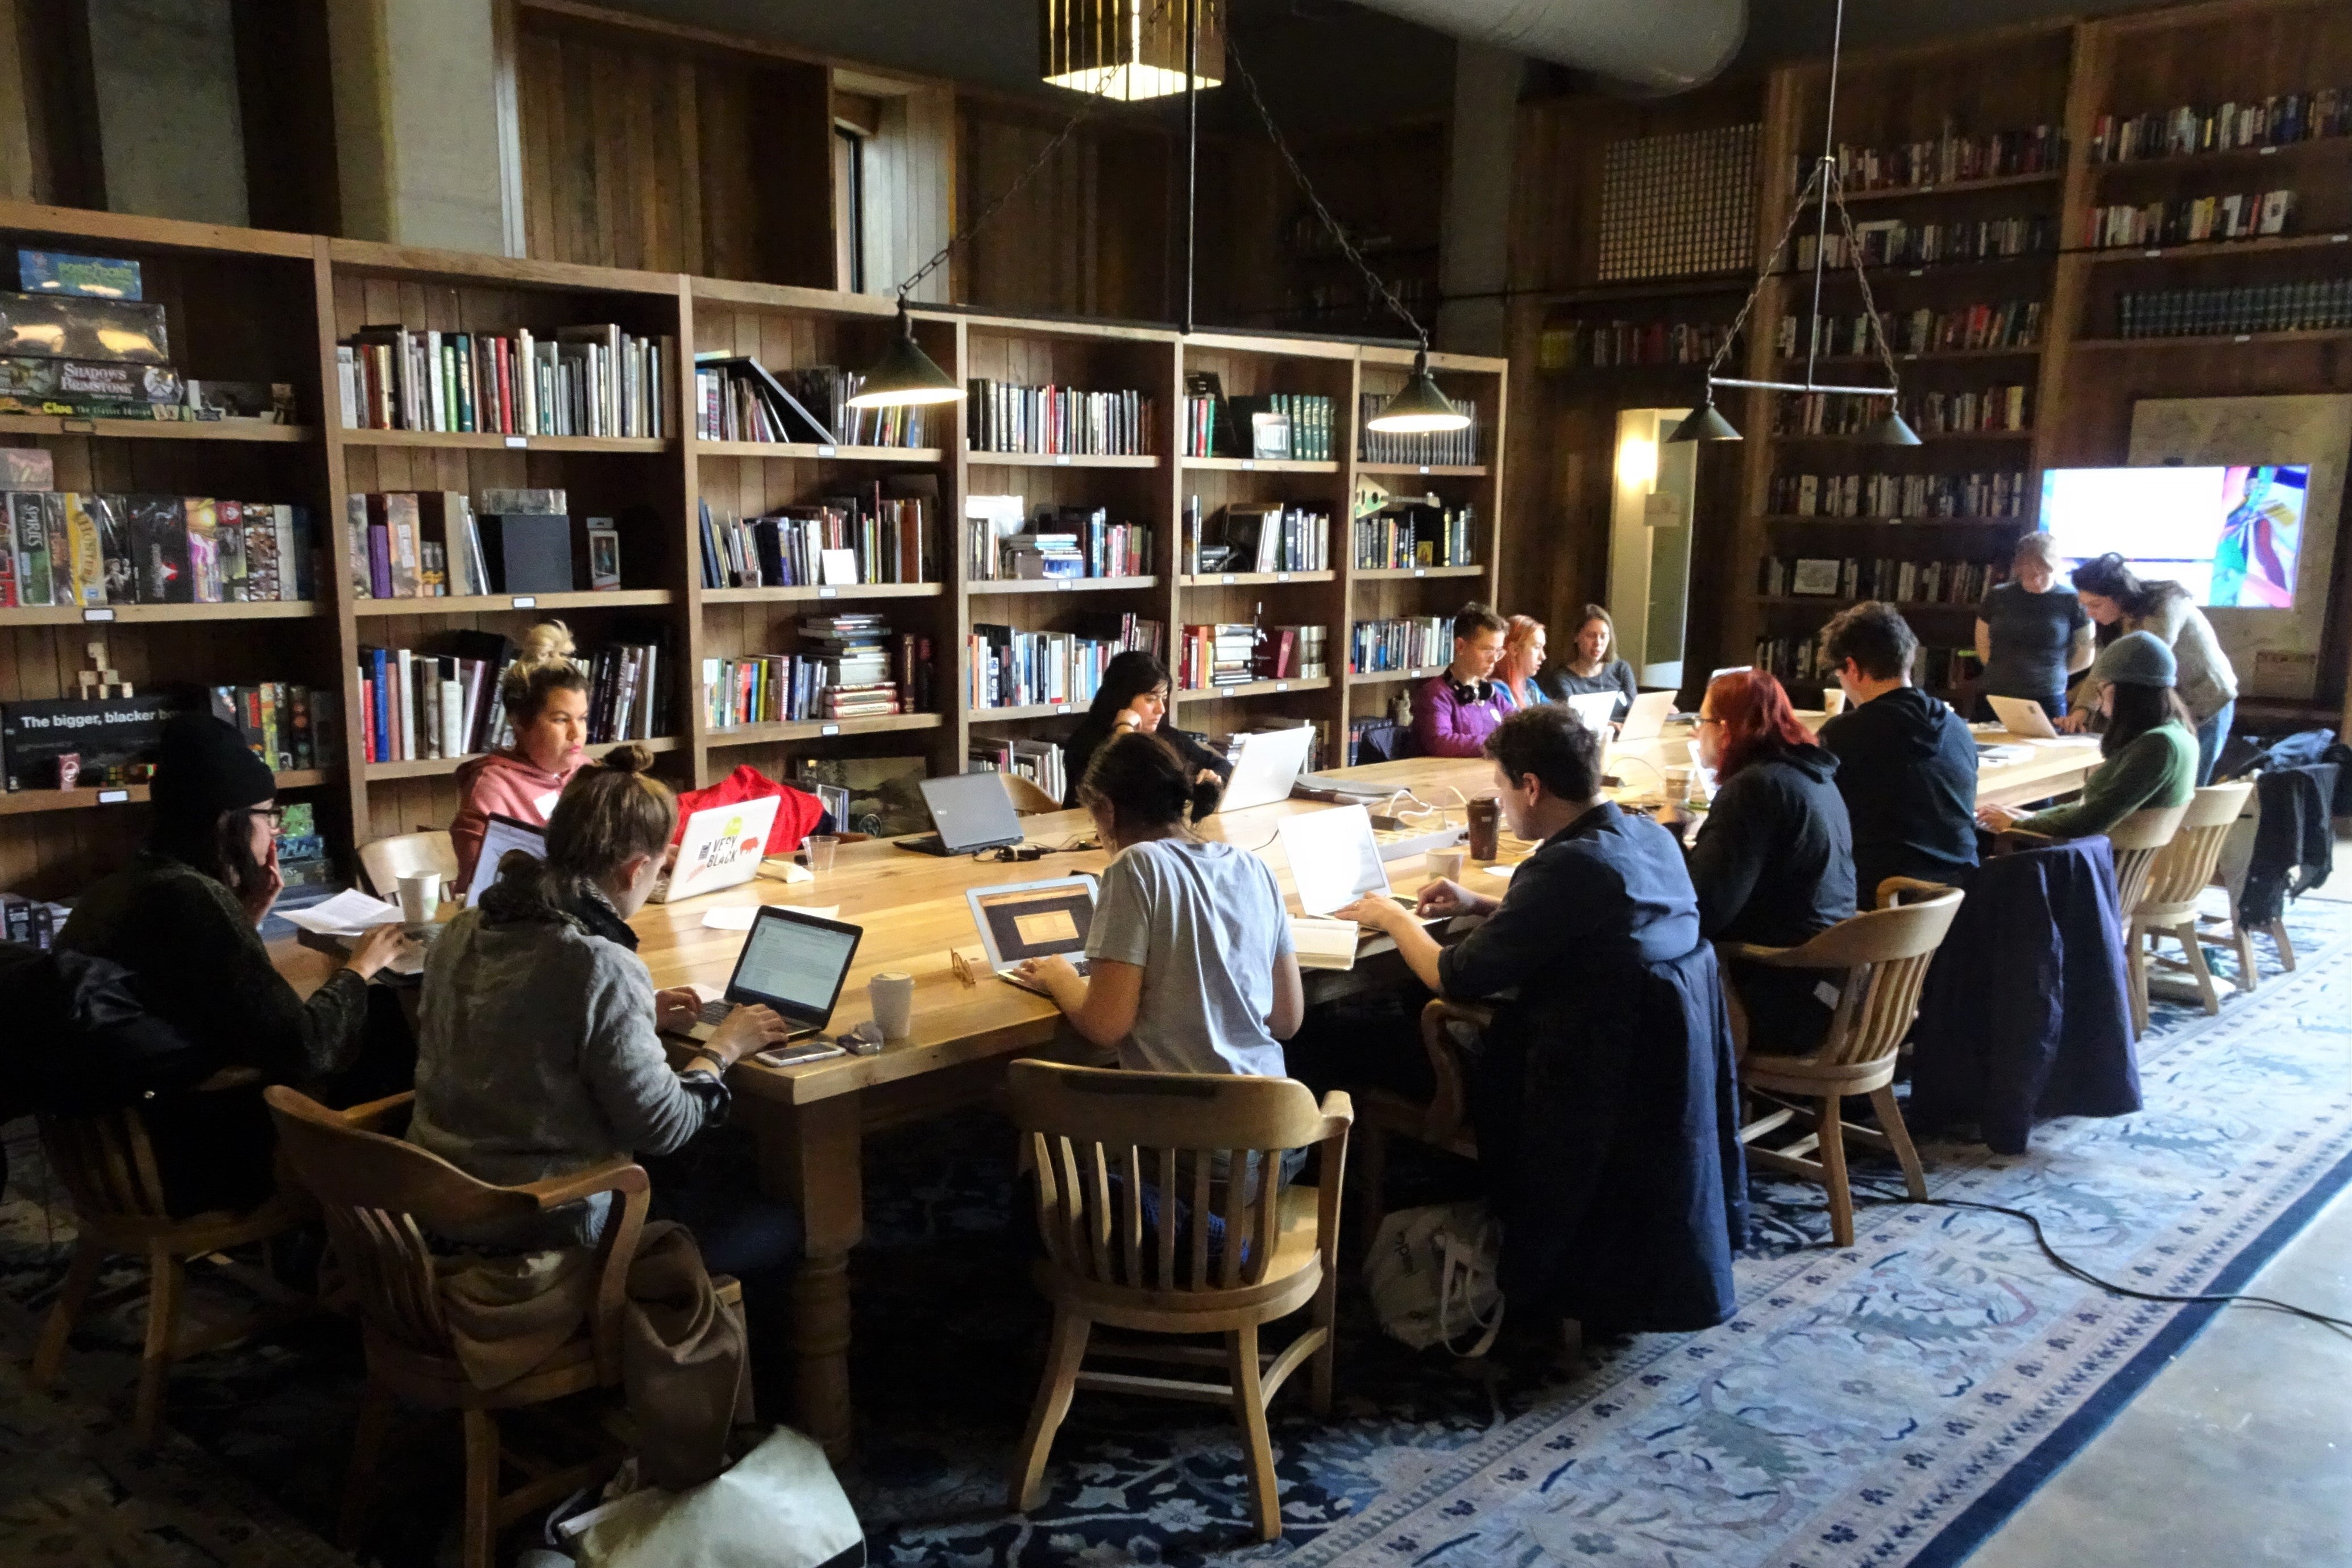 People working on laptops at a long communal table in the Kickstarter library.